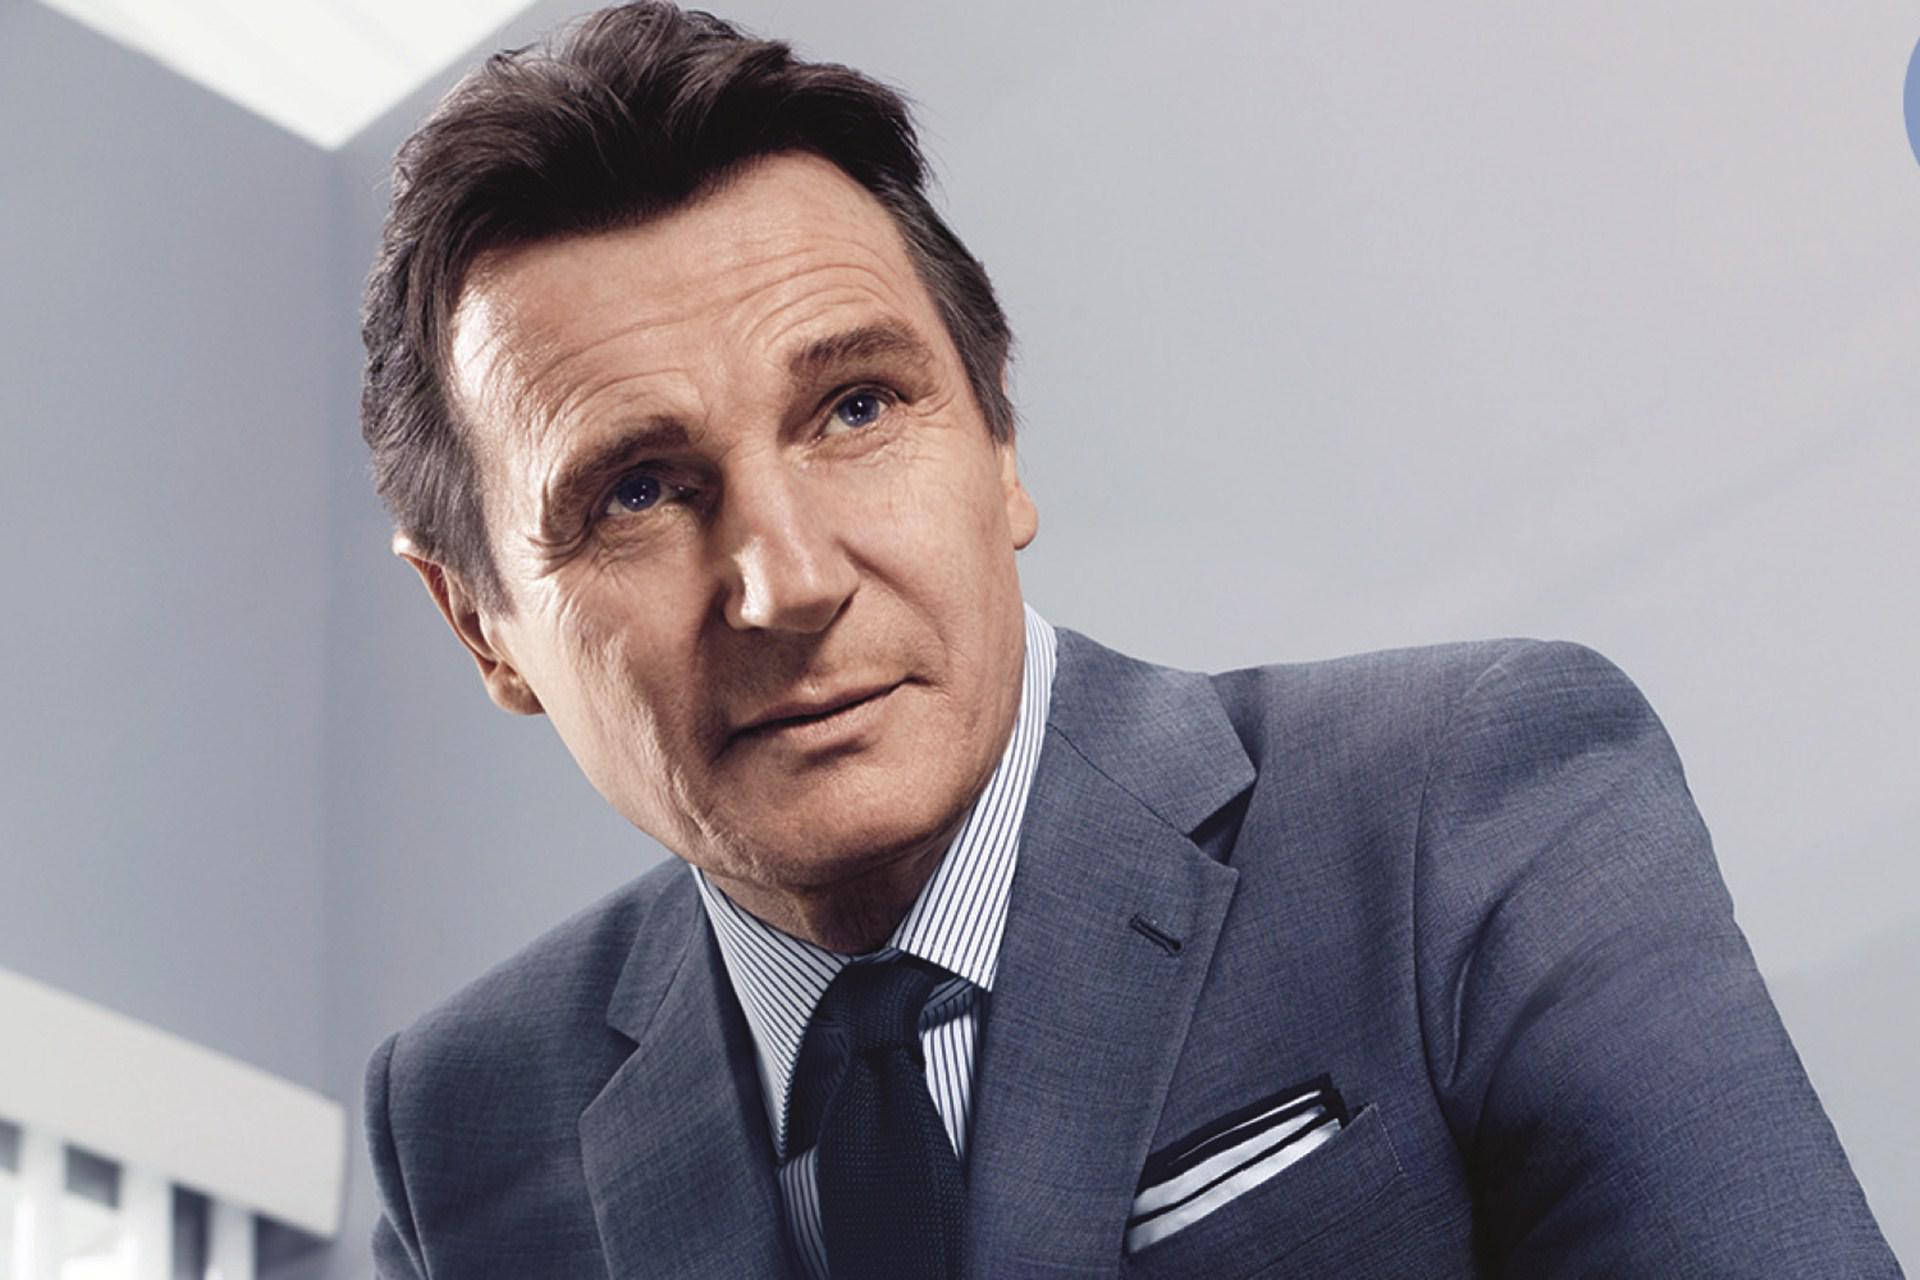 Liam Neeson GQ Mænds Magasin Fotoshoot, 2020 Wallpaper